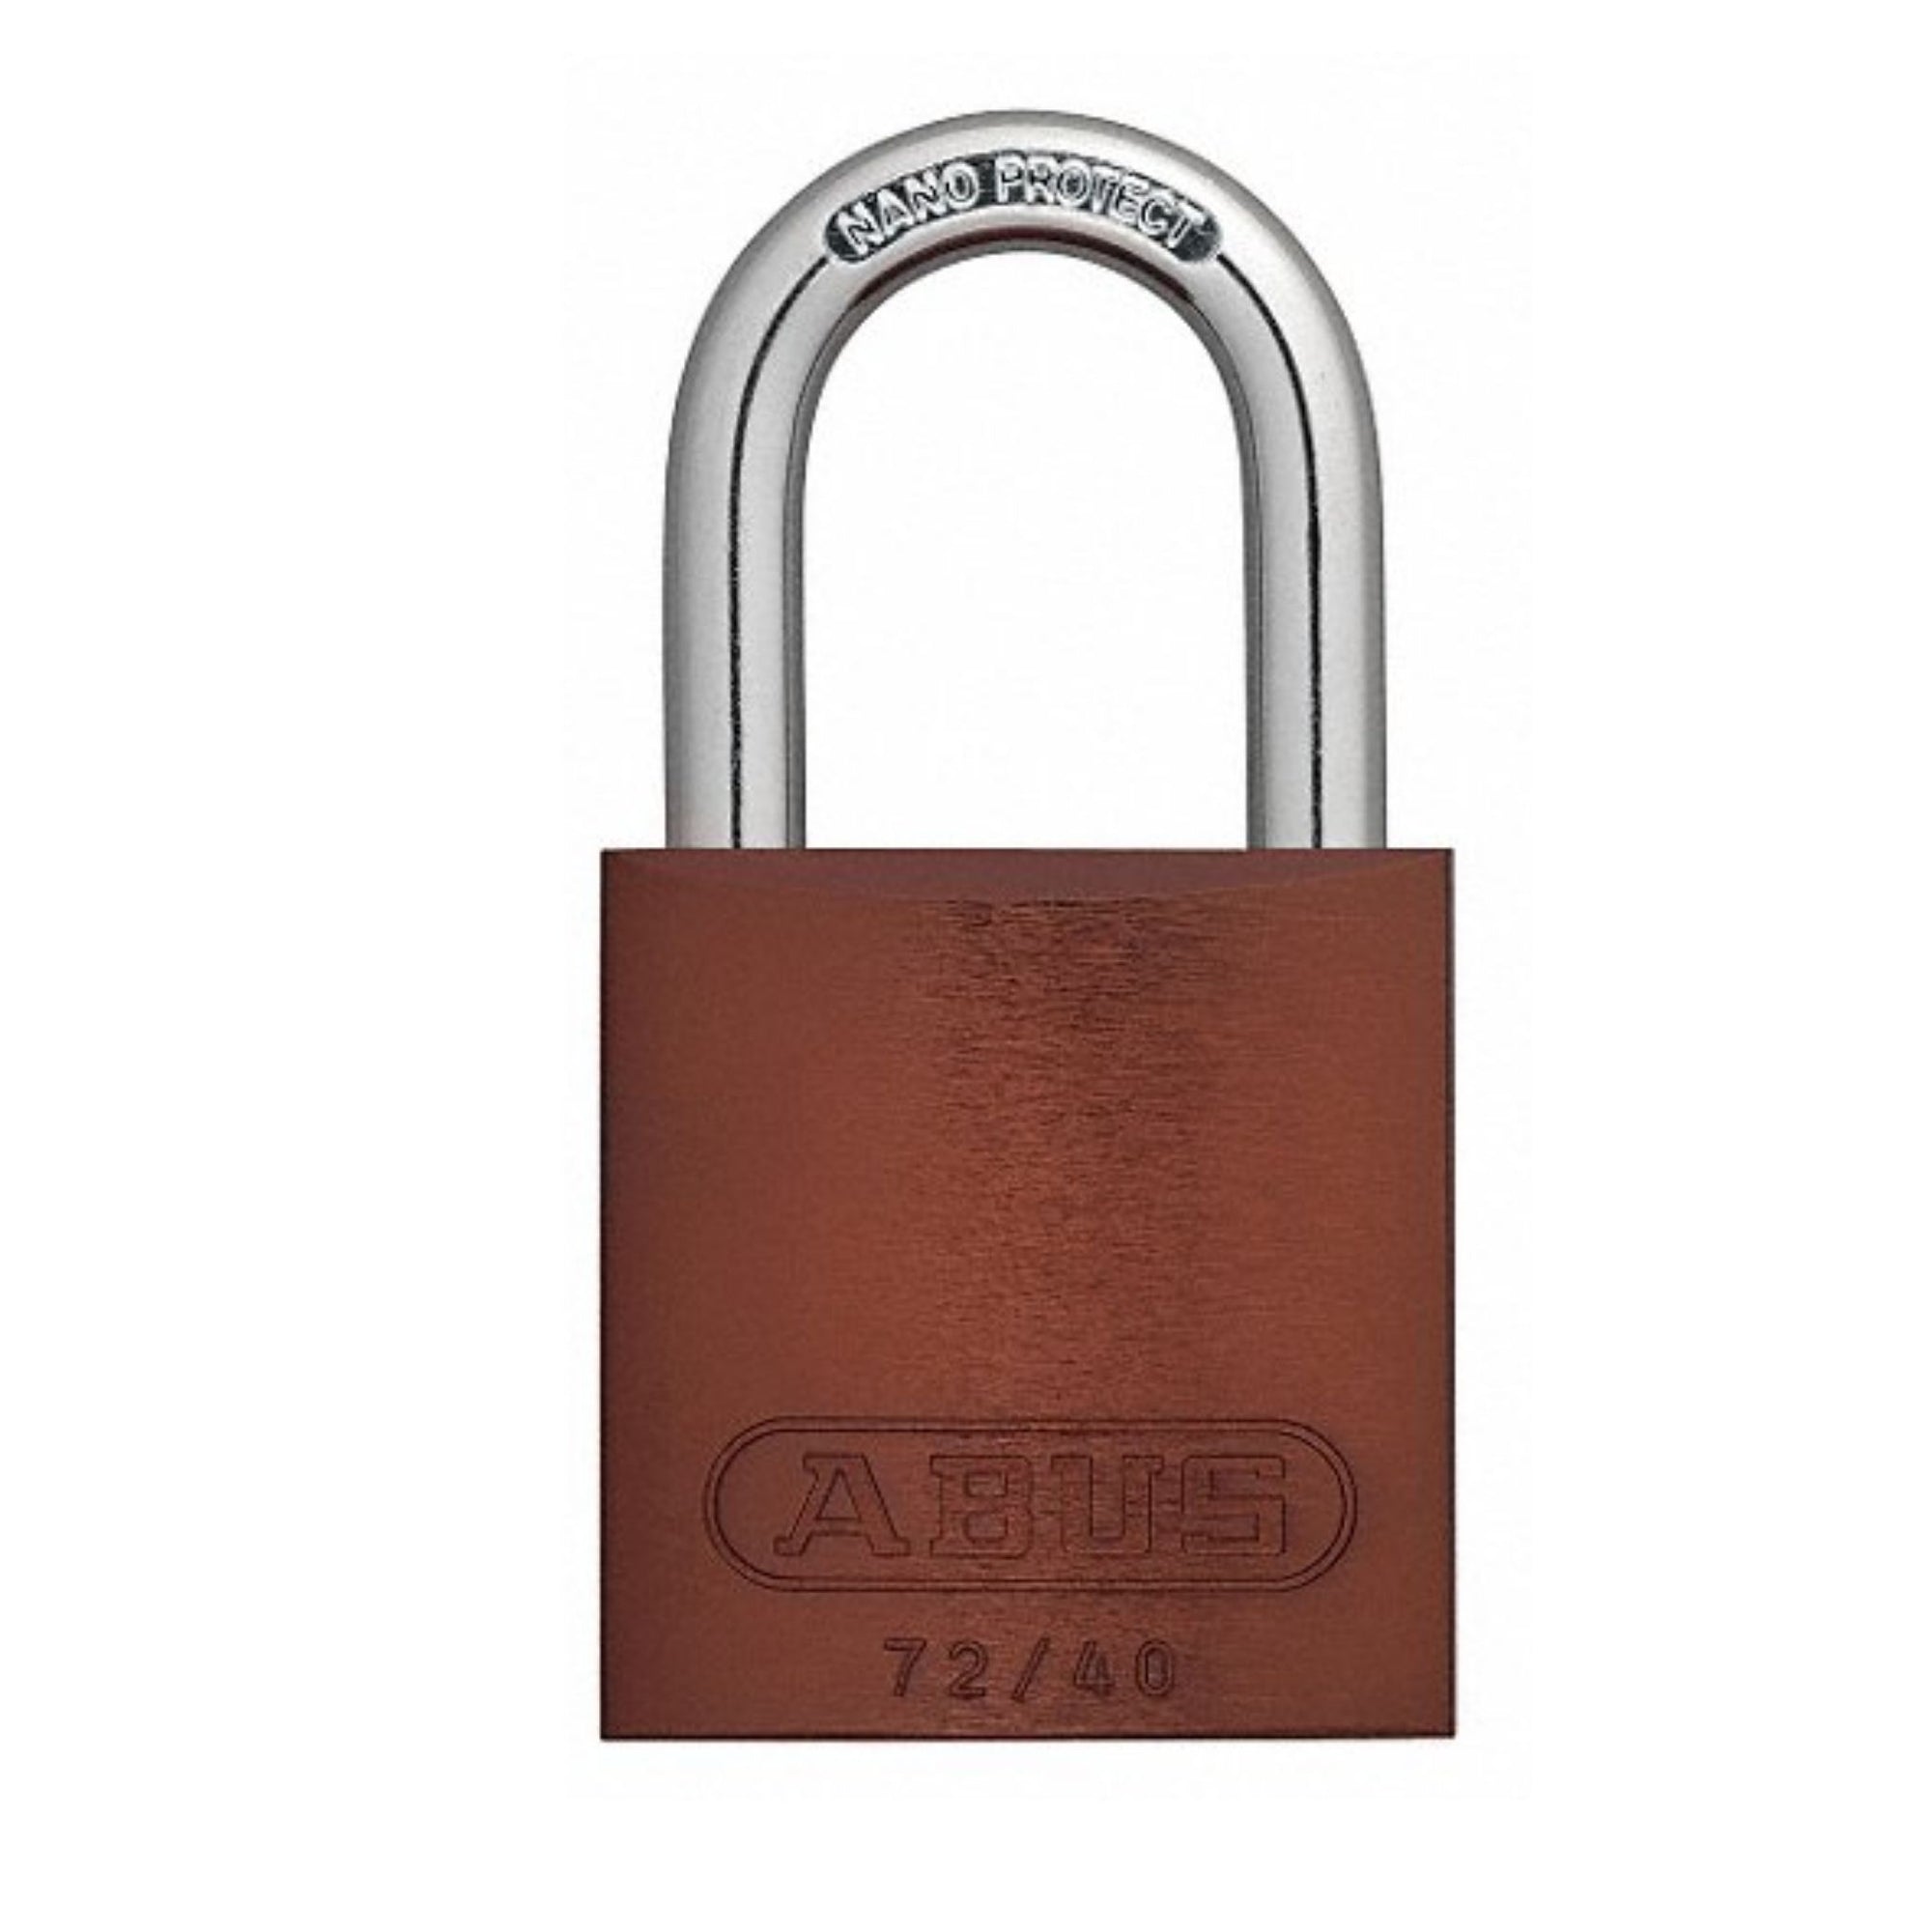 Abus 72/40 KA TT00036 Brown Titalium Safety Padlock with 1-Inch Shackle, Keyed Alike to Match Existing Key Number KATT00036 - The Lock Source 